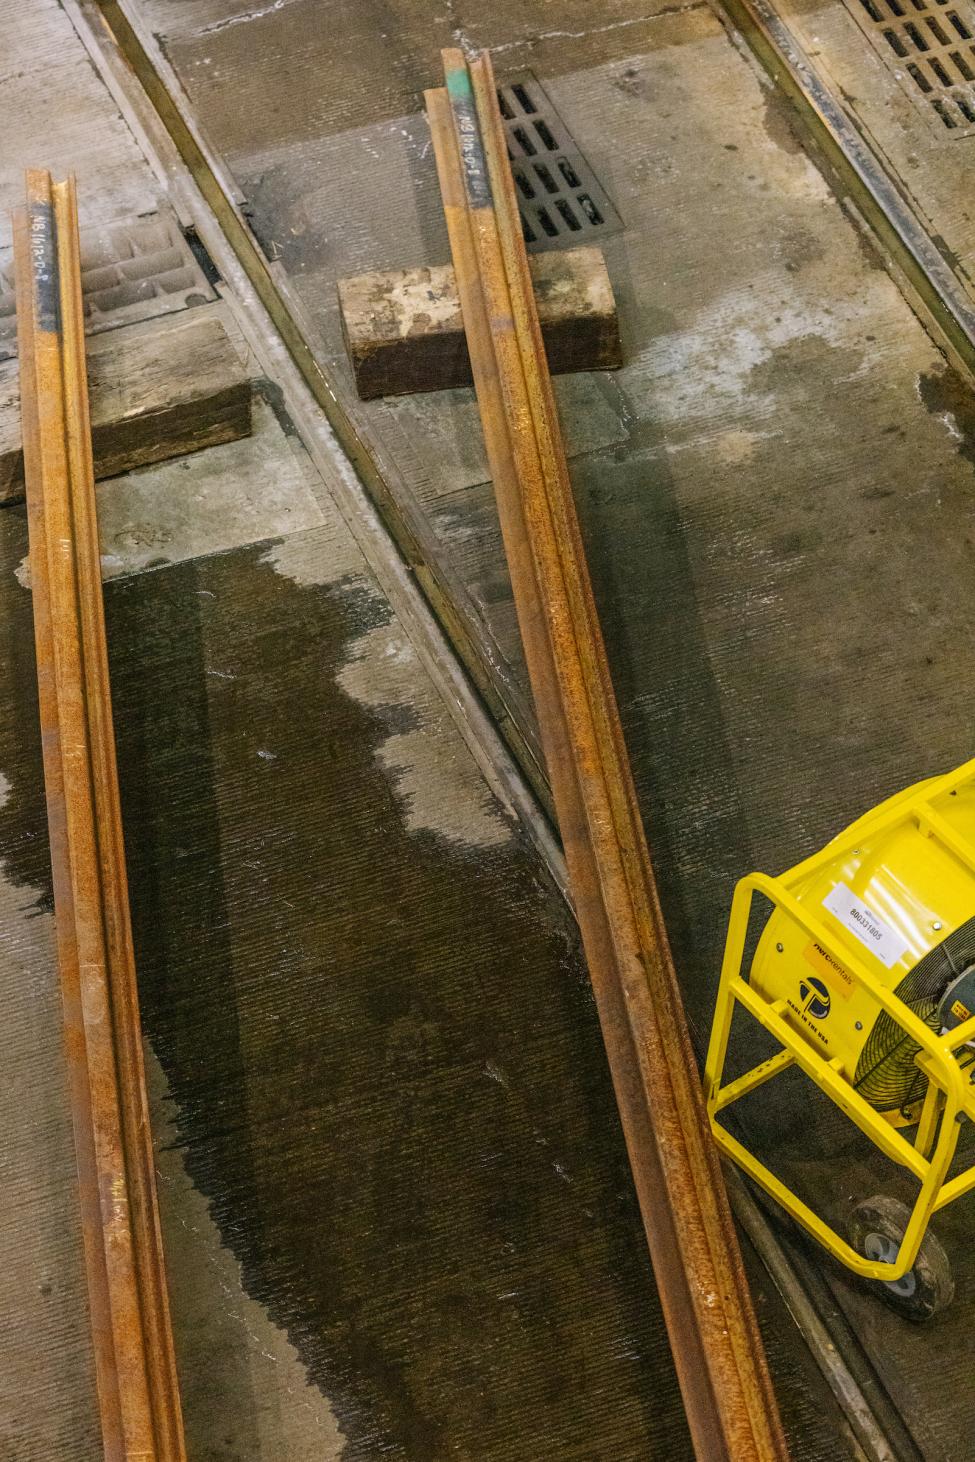 A piece of construction equipment and two rail lengths photographed from above